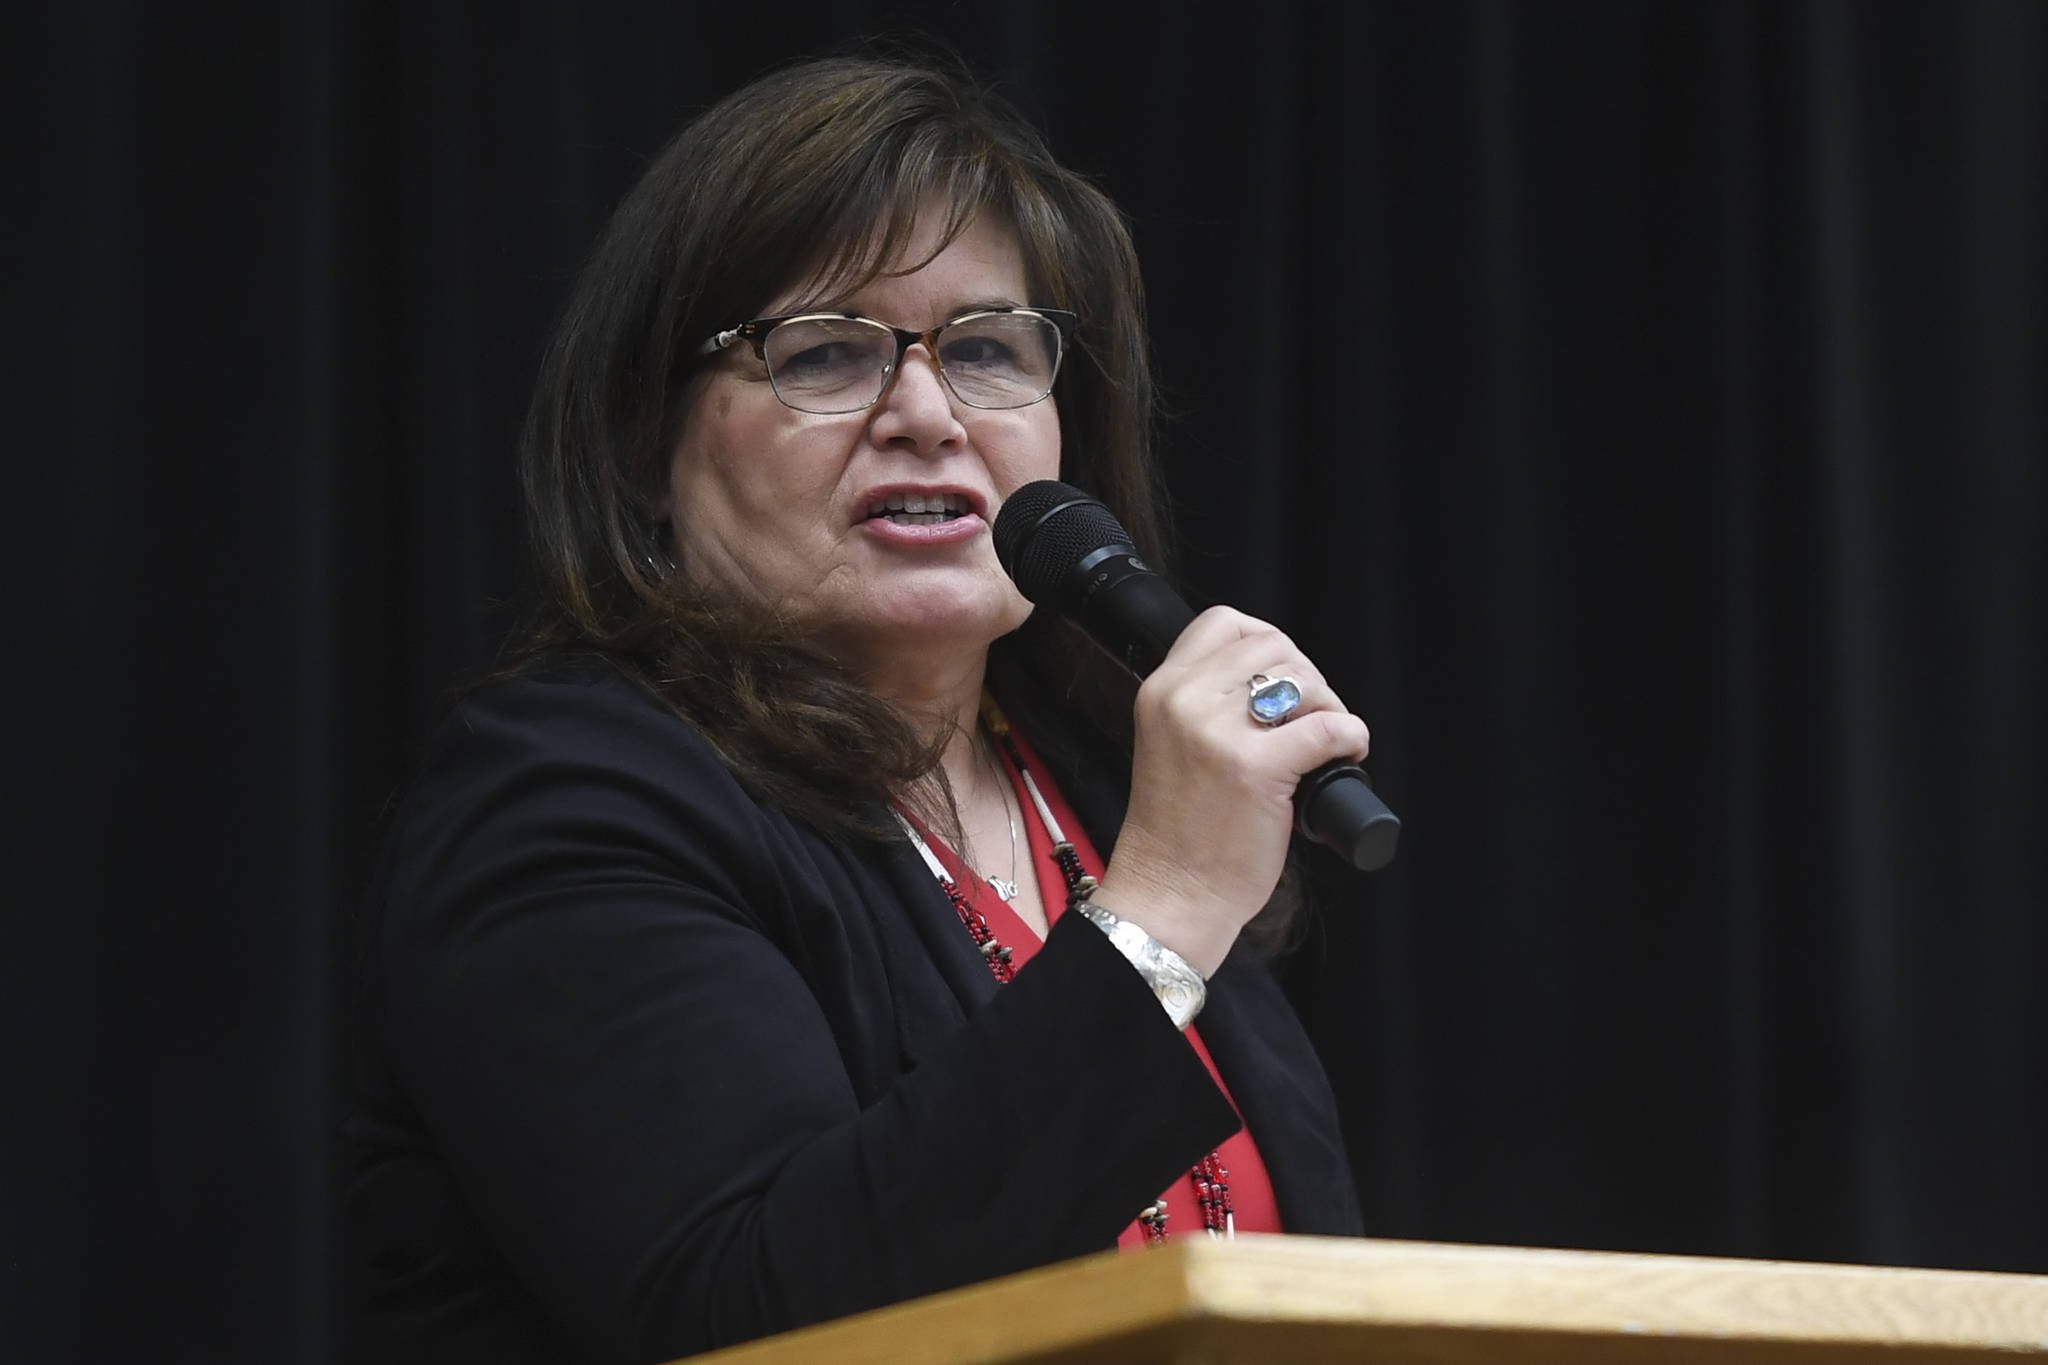 Jacqueline Pata, President & CEO of the Tlingit-Haida Regional Housing Authority, speaks during Indigenous Peoples’ Day at the Elizabeth Peratrovich Hall on Monday, Oct. 14, 2019. (Michael Penn | Juneau Empire)